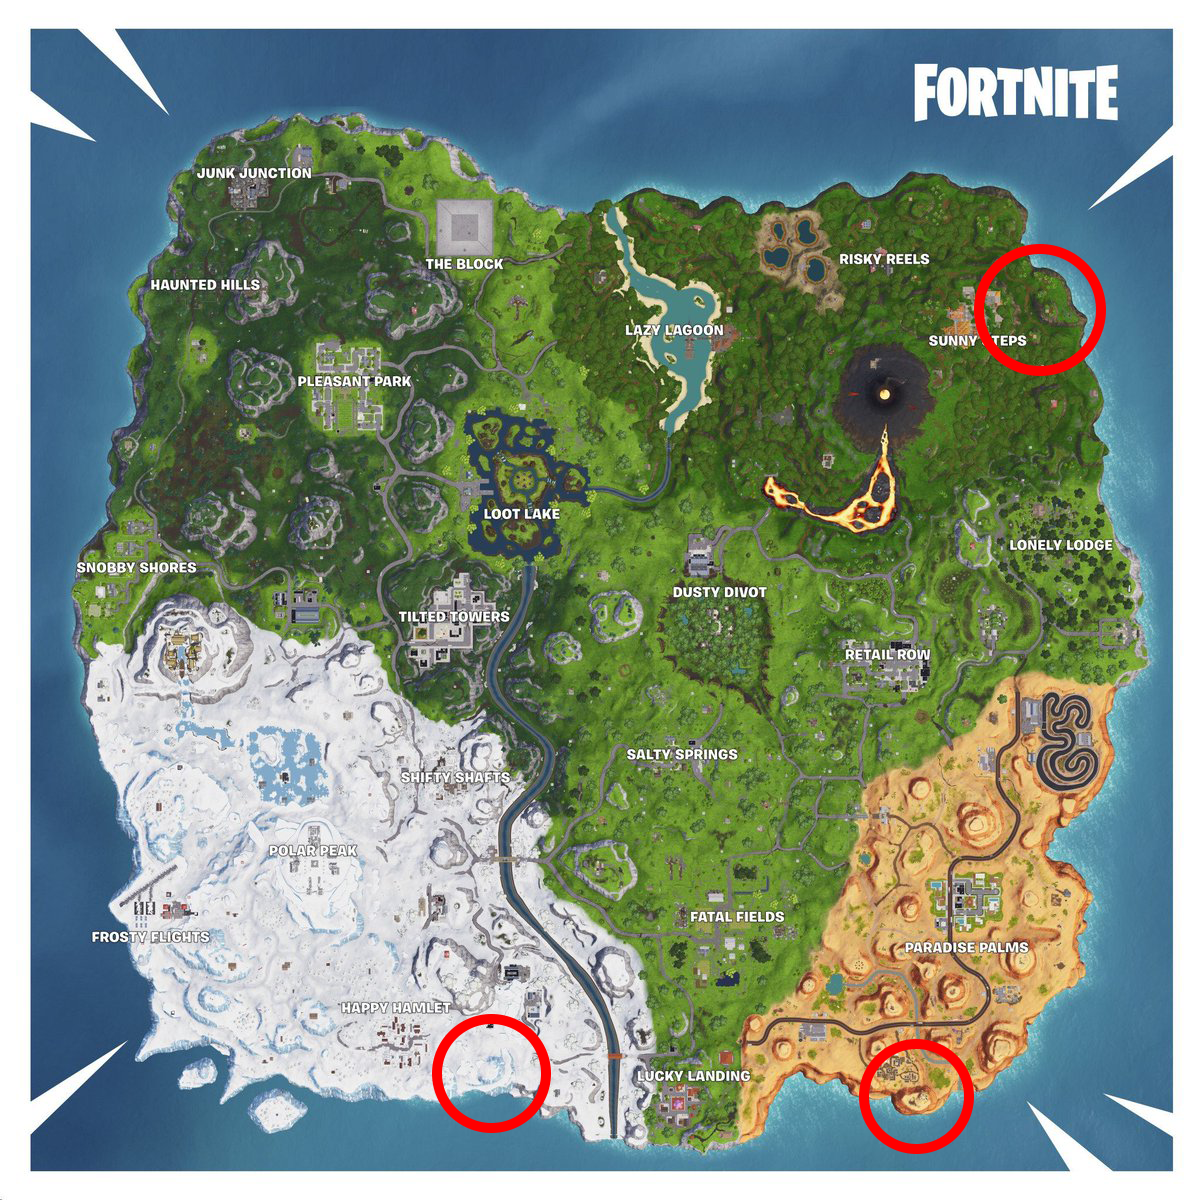 Fortnite Large Faces Where Are The Giant Faces On Fortnite Map Locations For Season 8 Challenge Sporting News